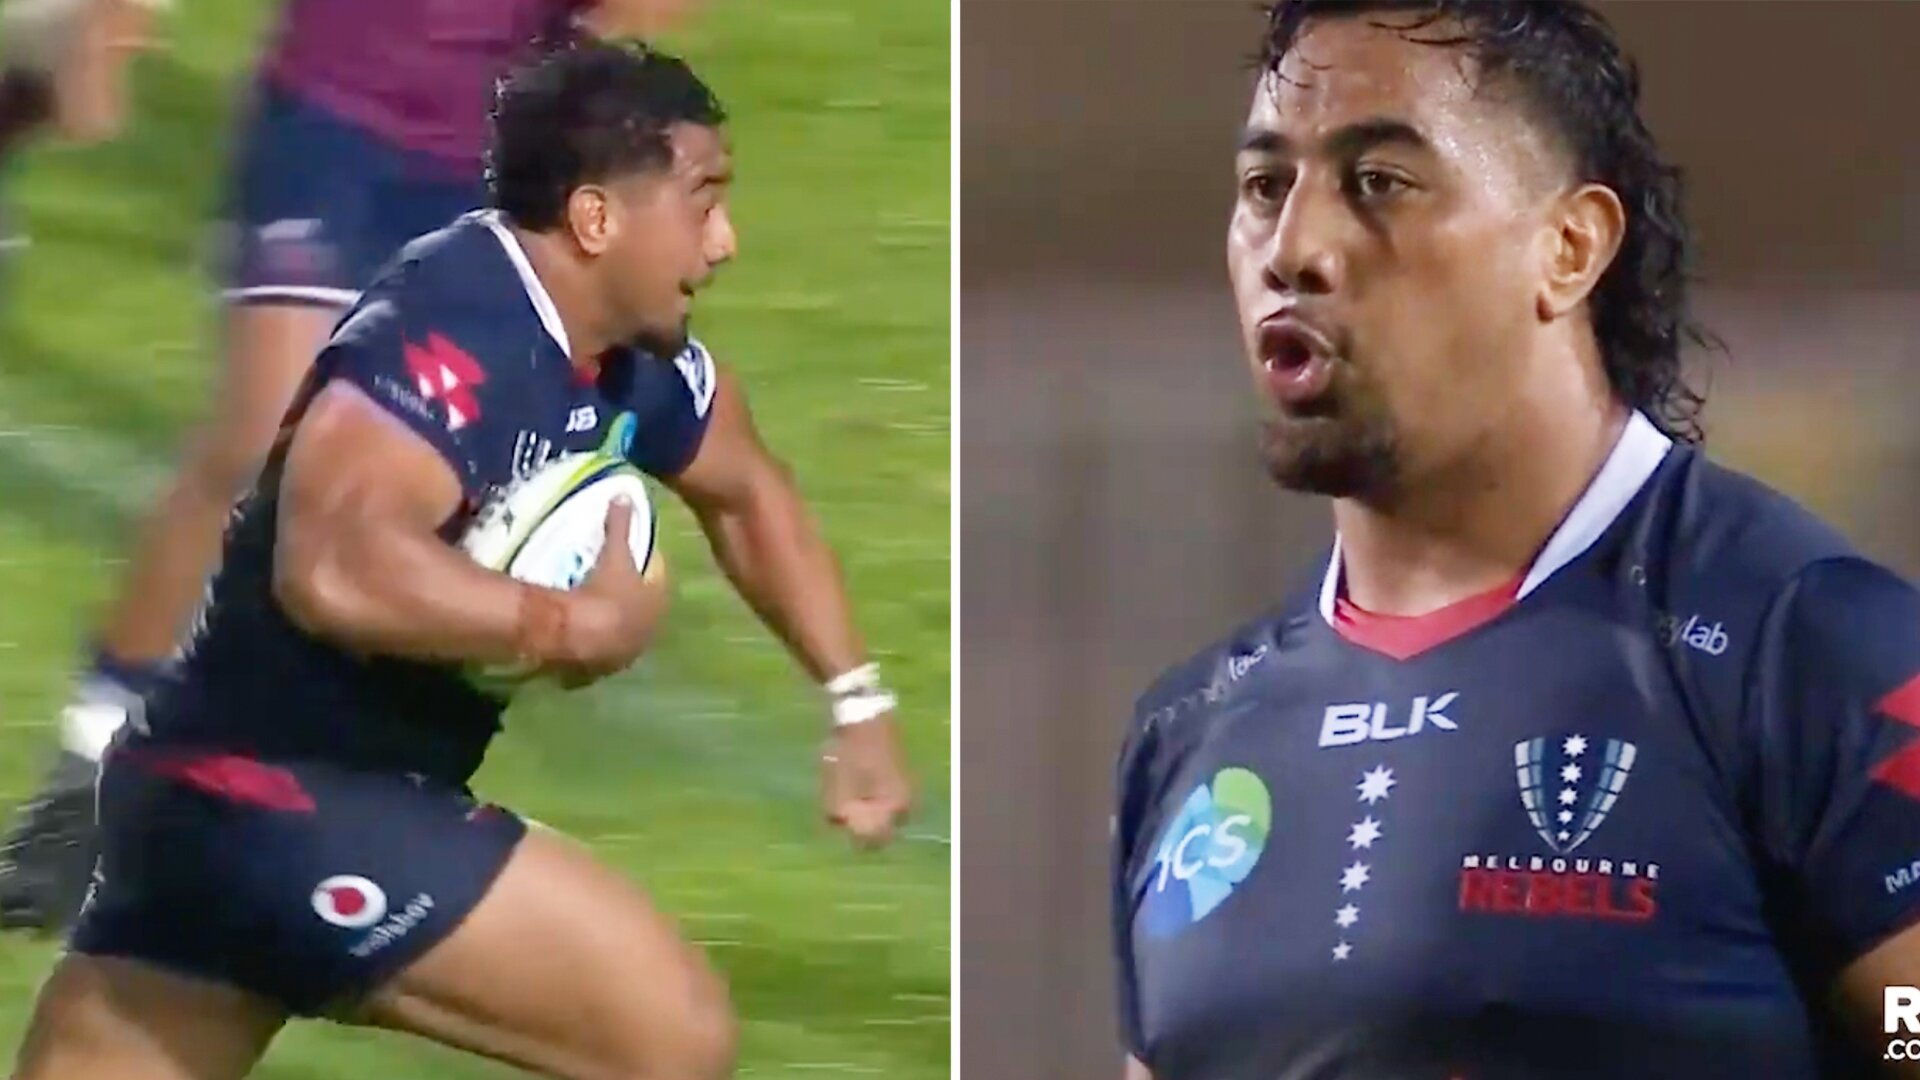 145kg prop stuns Super Rugby crowd with bone crunching tackle in awesome display of power